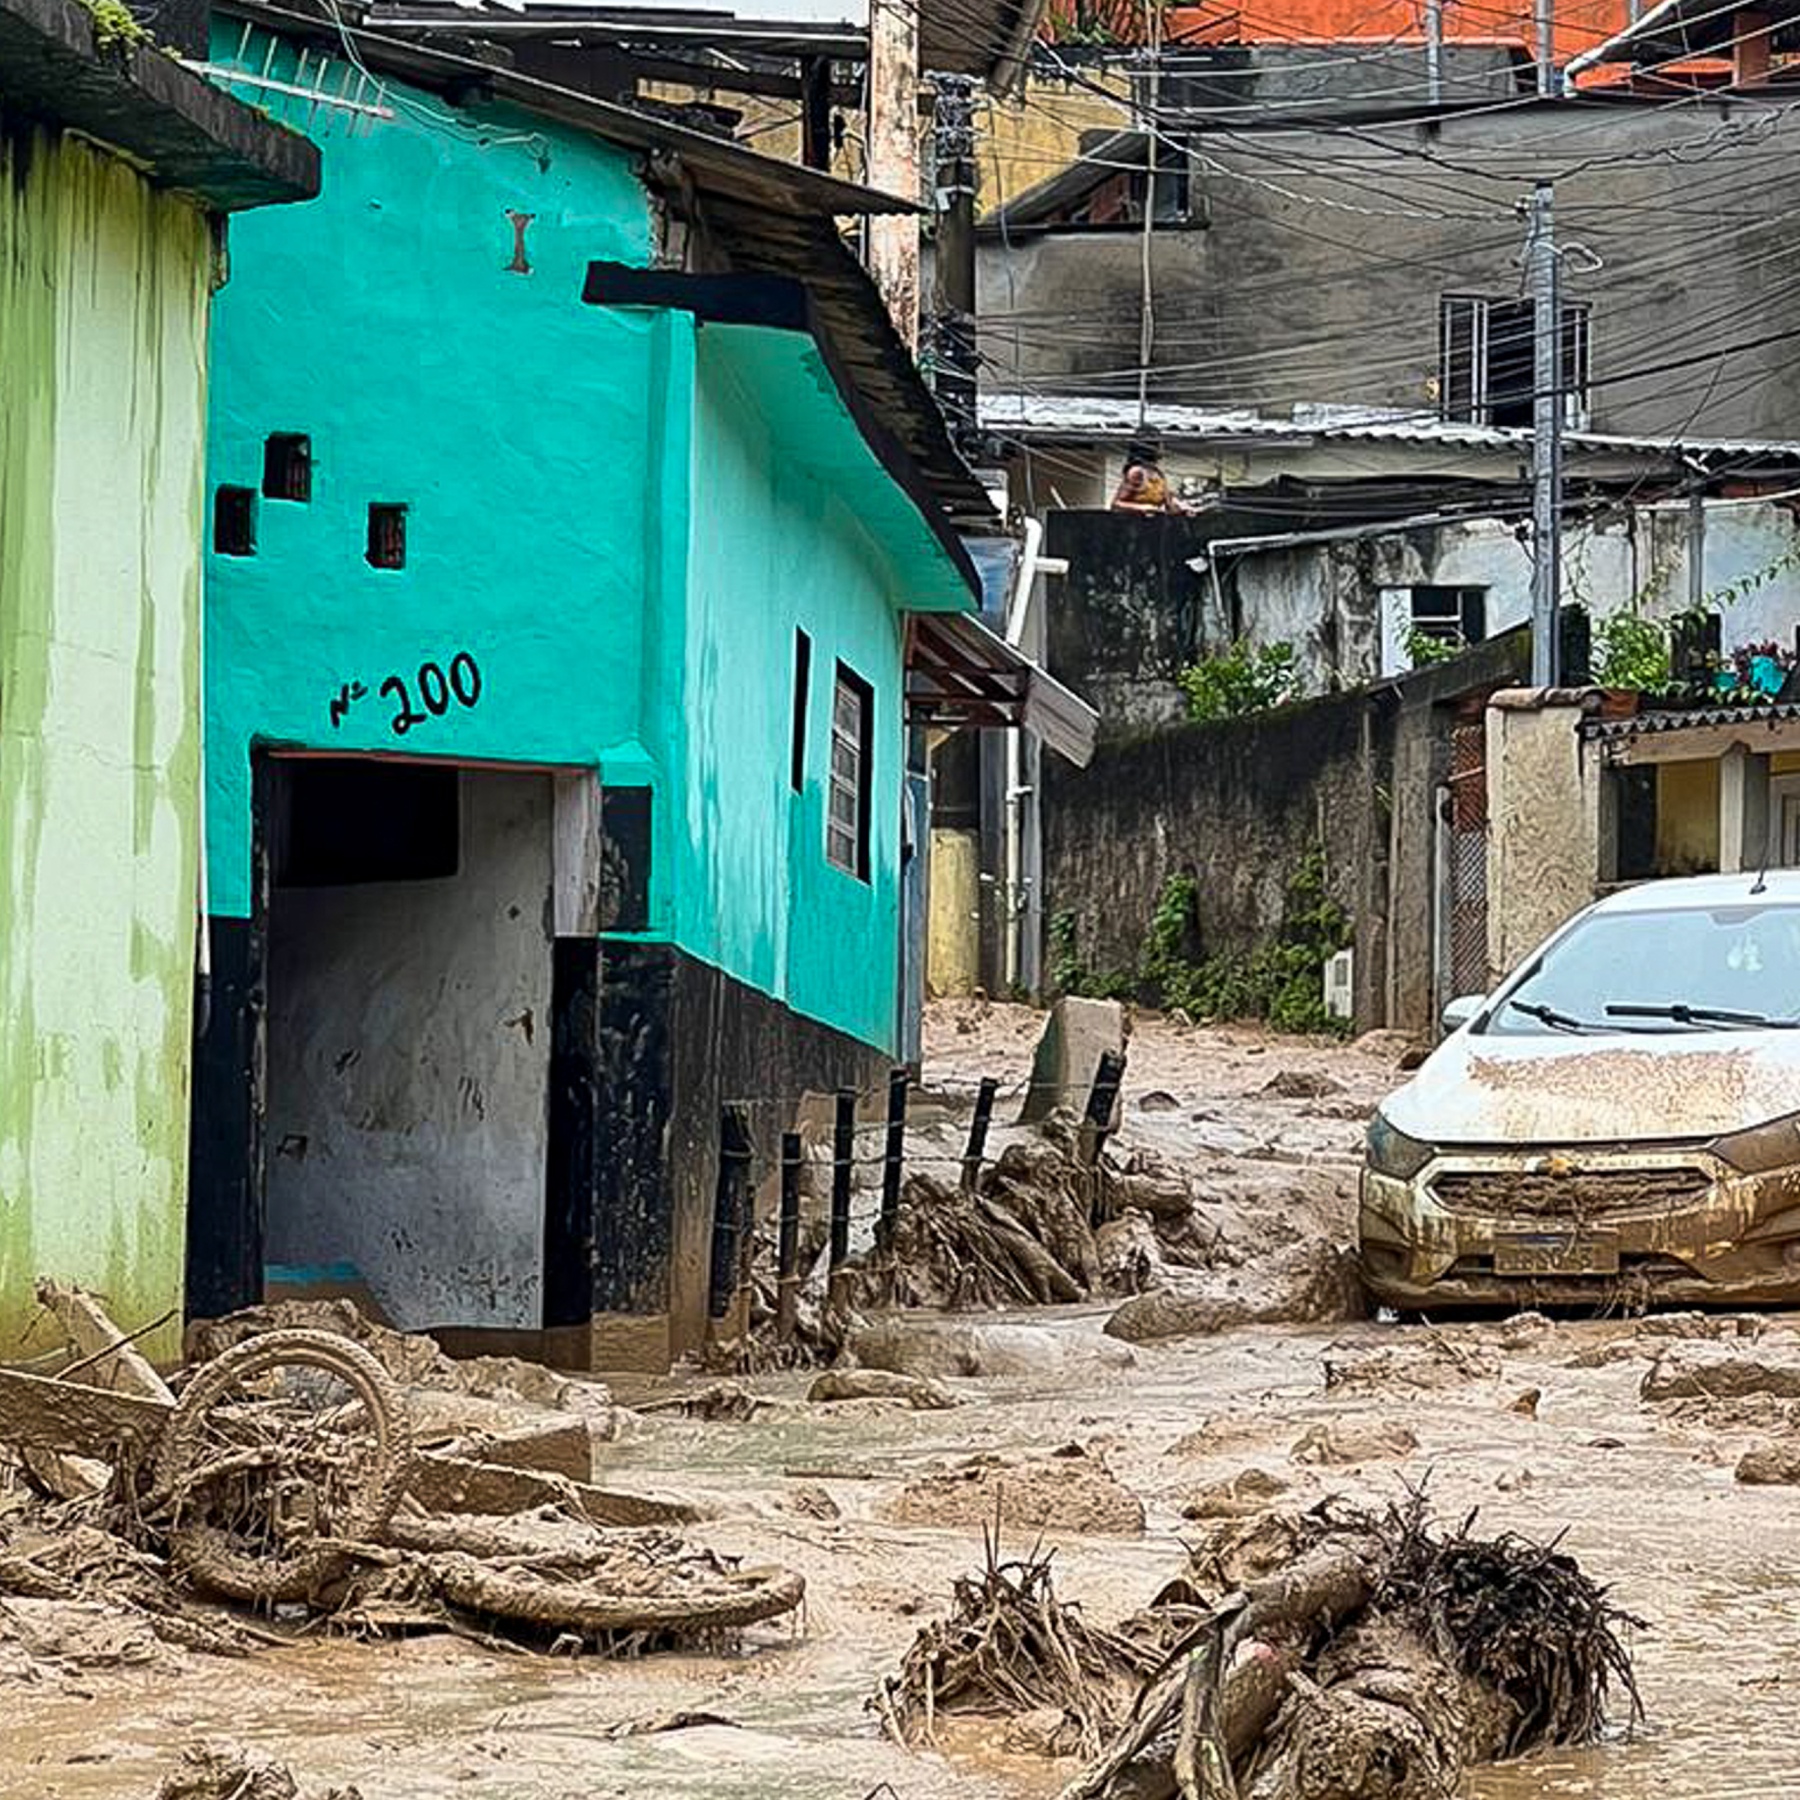 11 Killed, 25 Missing After Extra-Tropical Cyclone Hits Brazil